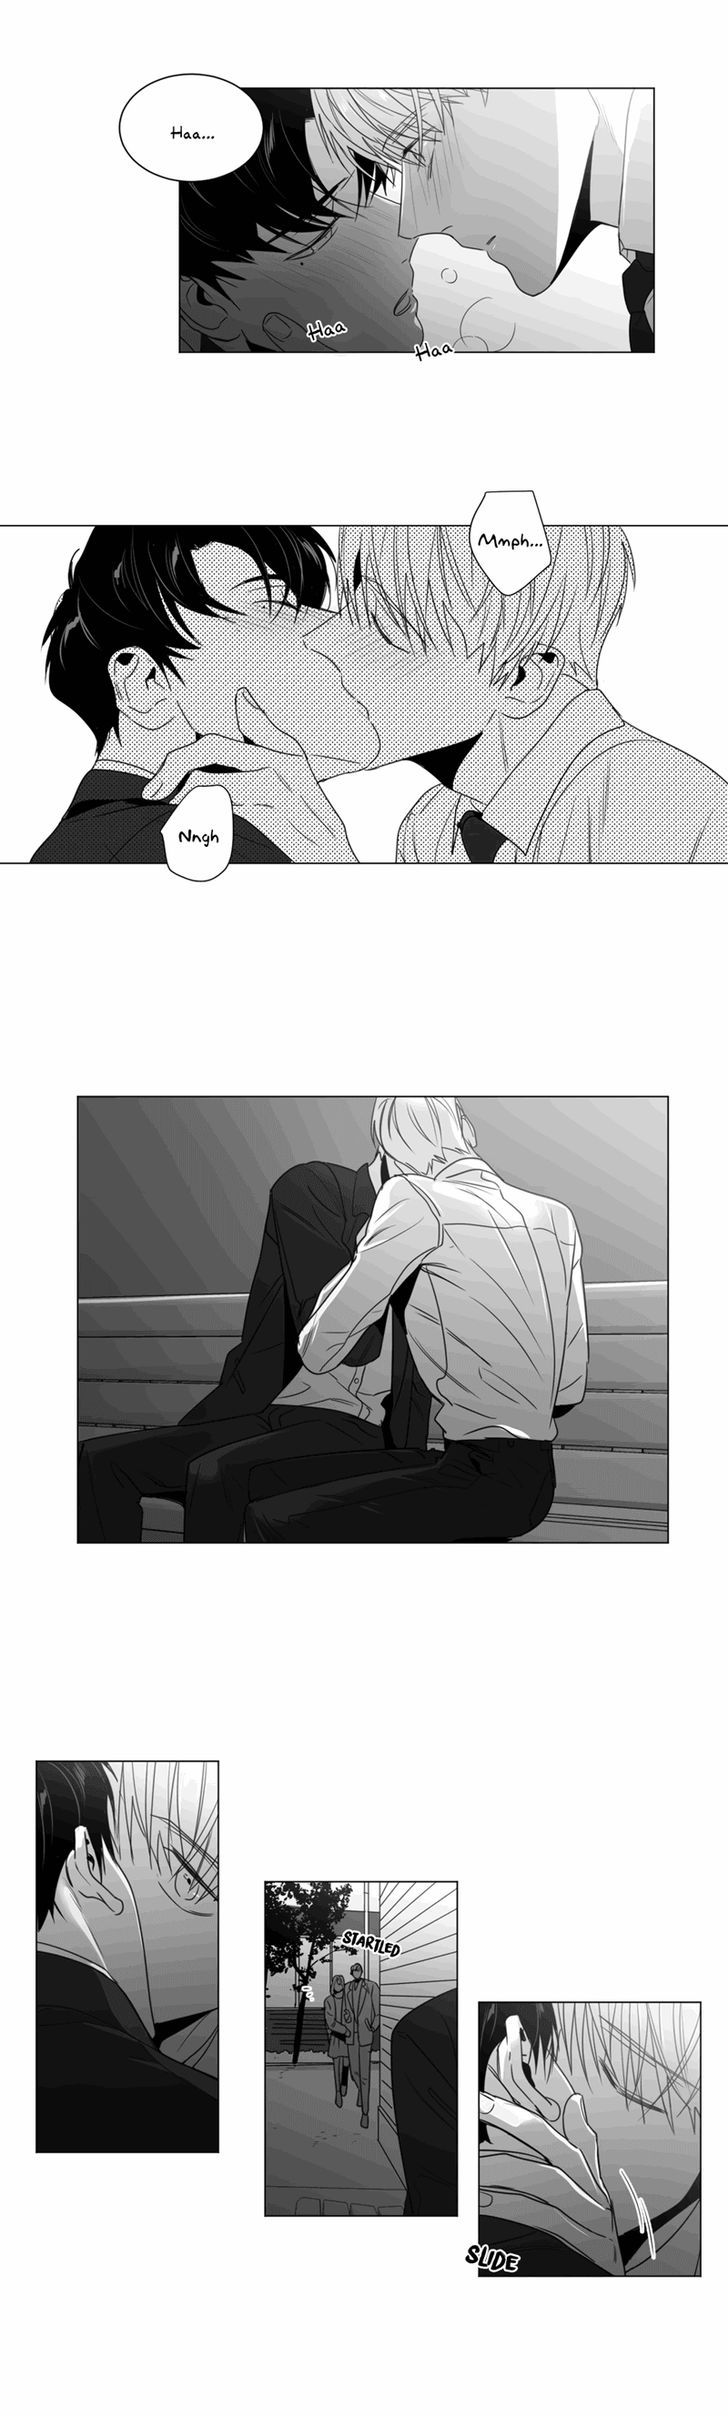 Lover Boy (Lezhin) Chapter 033 page 7